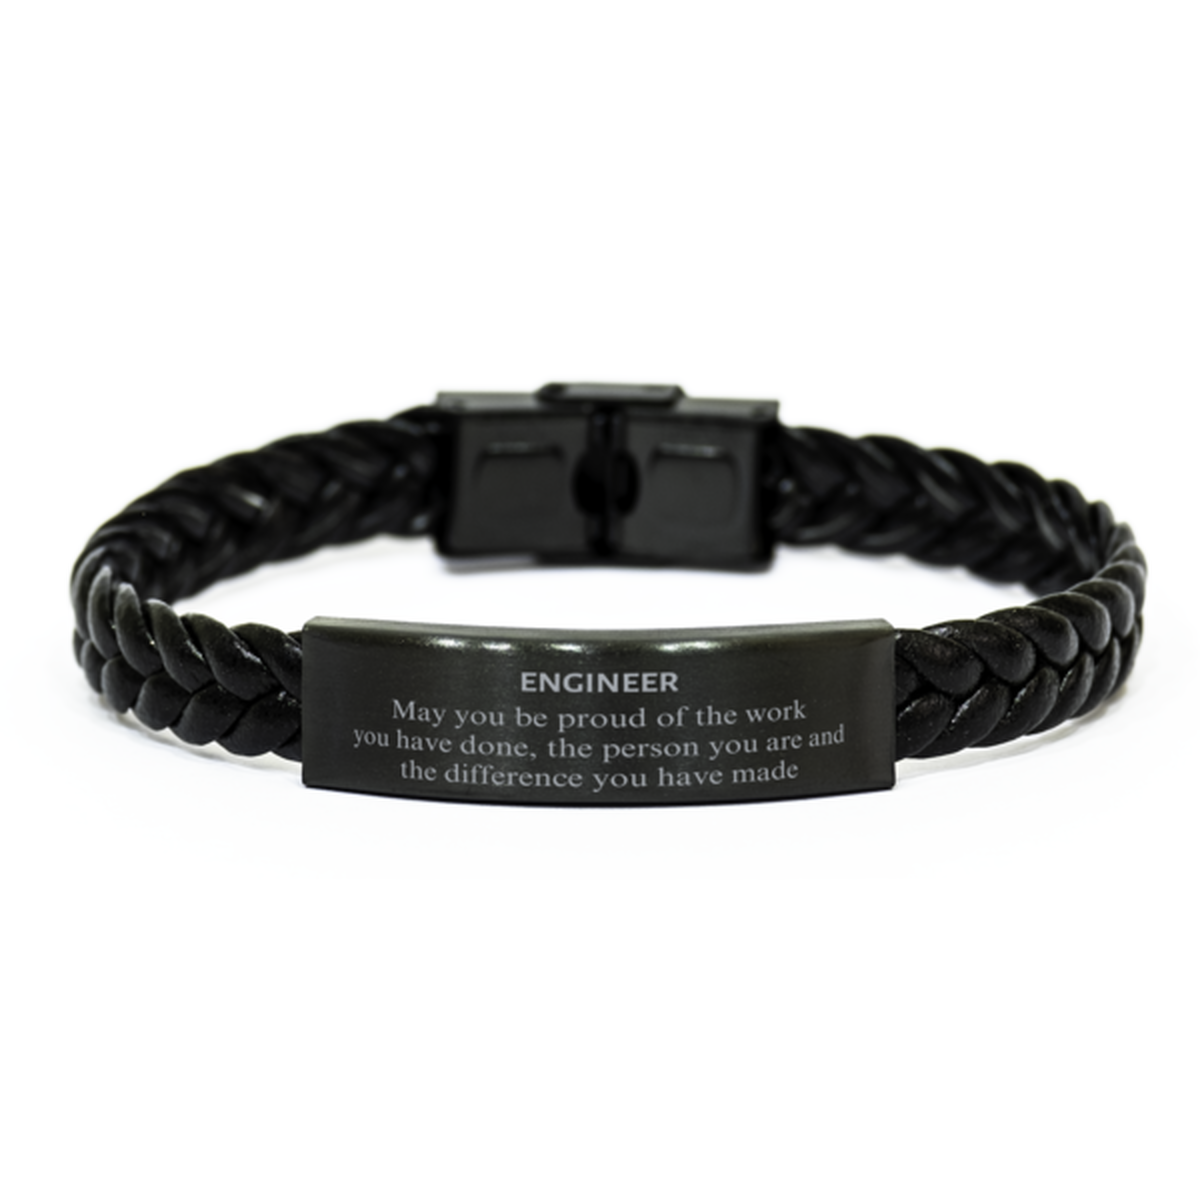 Engineer May you be proud of the work you have done, Retirement Engineer Braided Leather Bracelet for Colleague Appreciation Gifts Amazing for Engineer